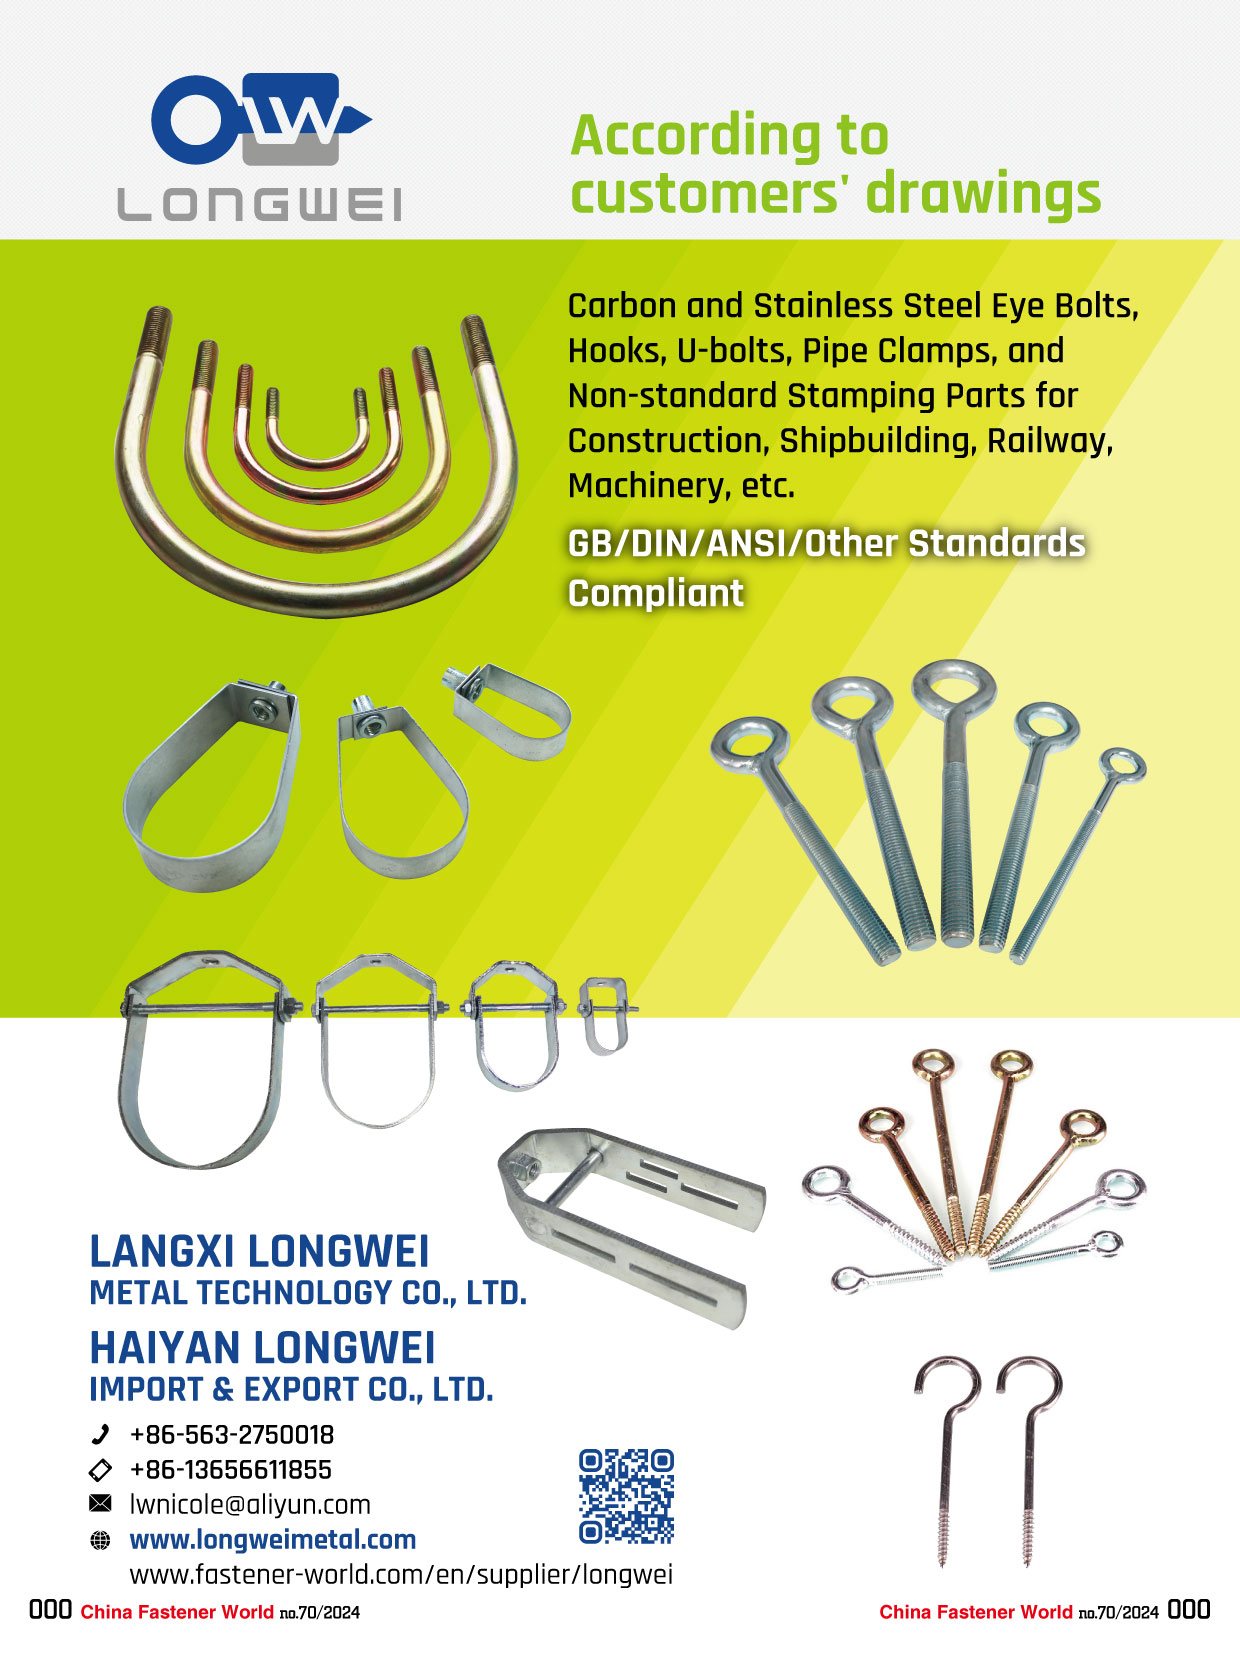 LANGXI LONGWEI METAL TECHNOLOGY CO., LTD. , According to customers' drawings Carbon and Stainless Steel Eye Bolts, Hooks, U-bolts, Pipe Clamps, and Non-standard Stamping Parts for Construction, Shipbuilding, Railway, Machinery, etc.